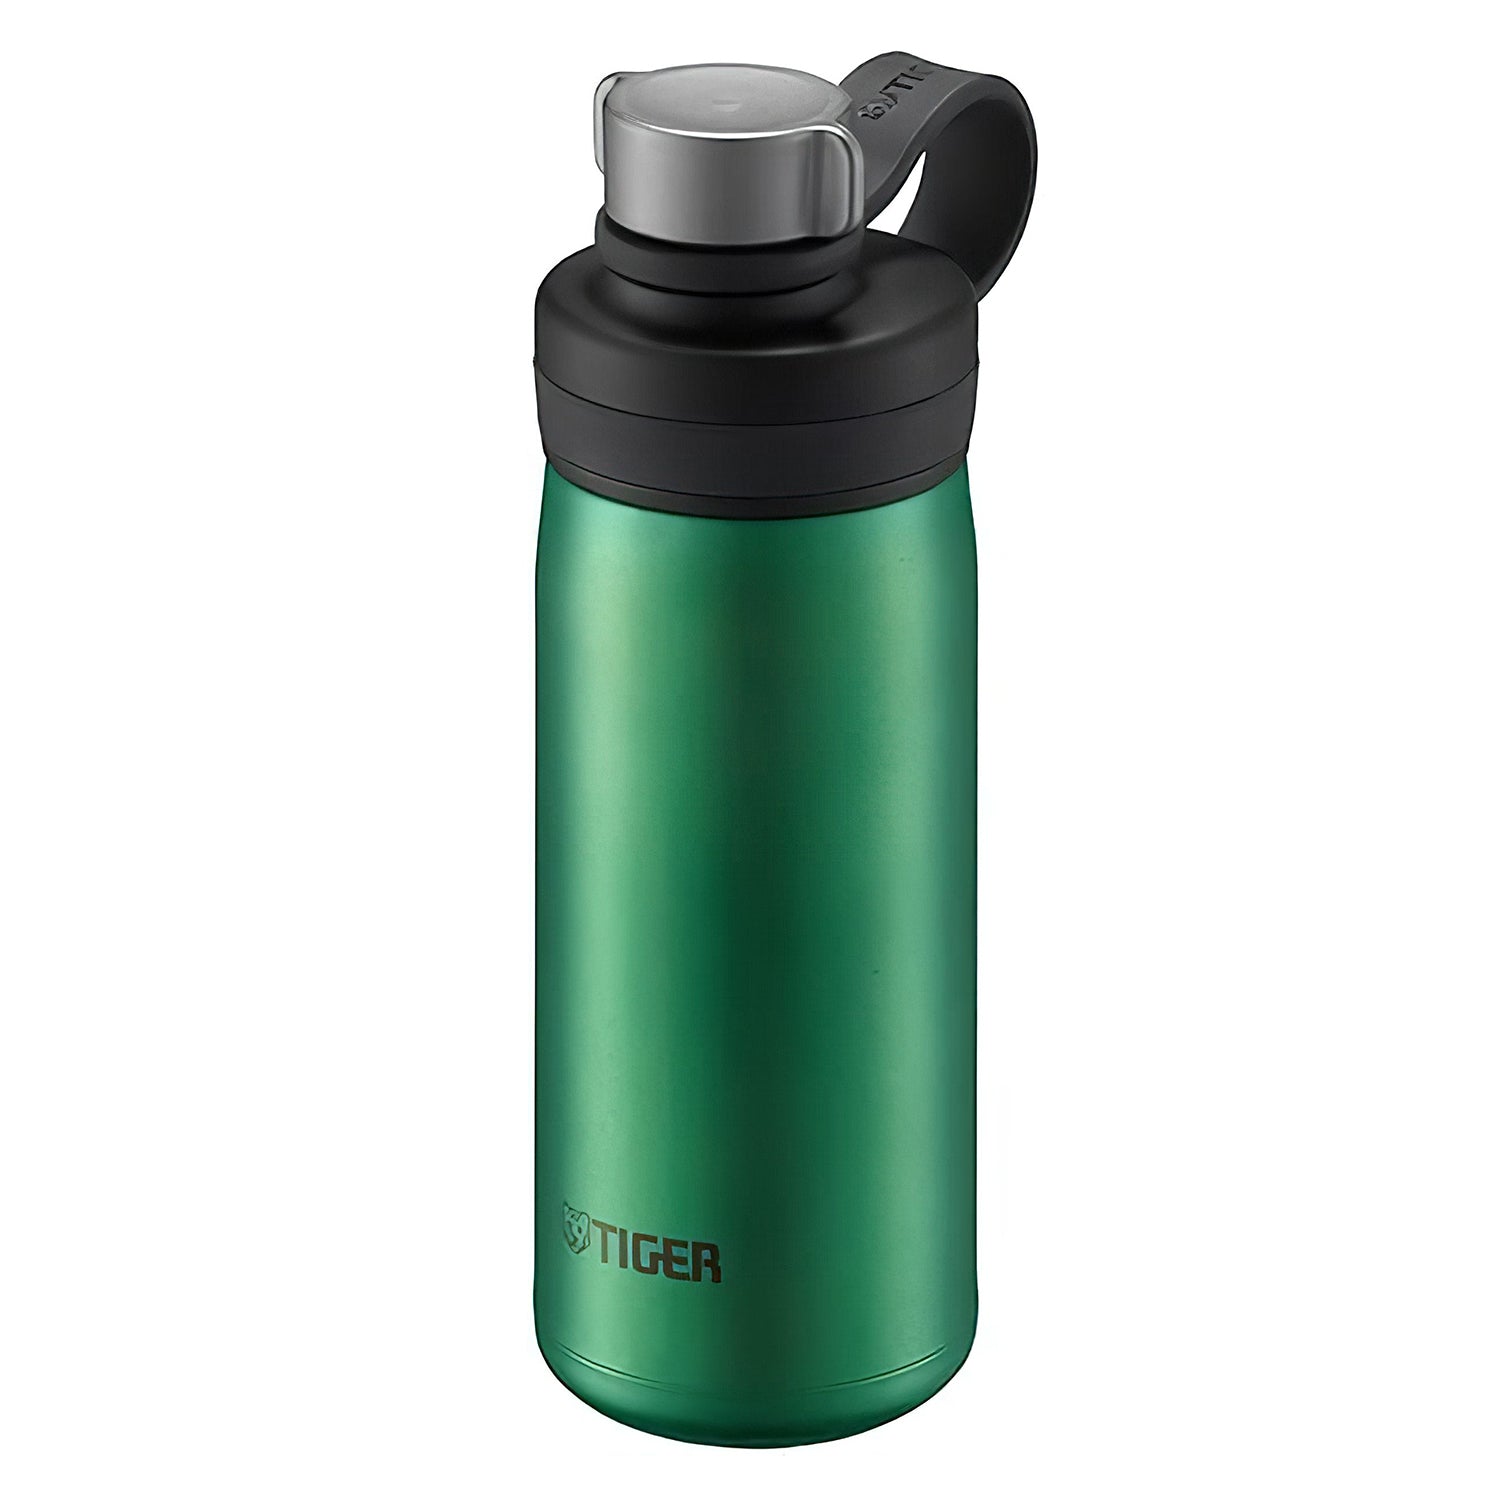 https://cdn.shopify.com/s/files/1/1610/3863/products/TigerStainlessSteelWaterBottleMTA-T050_2_2000x.jpg?v=1656983088